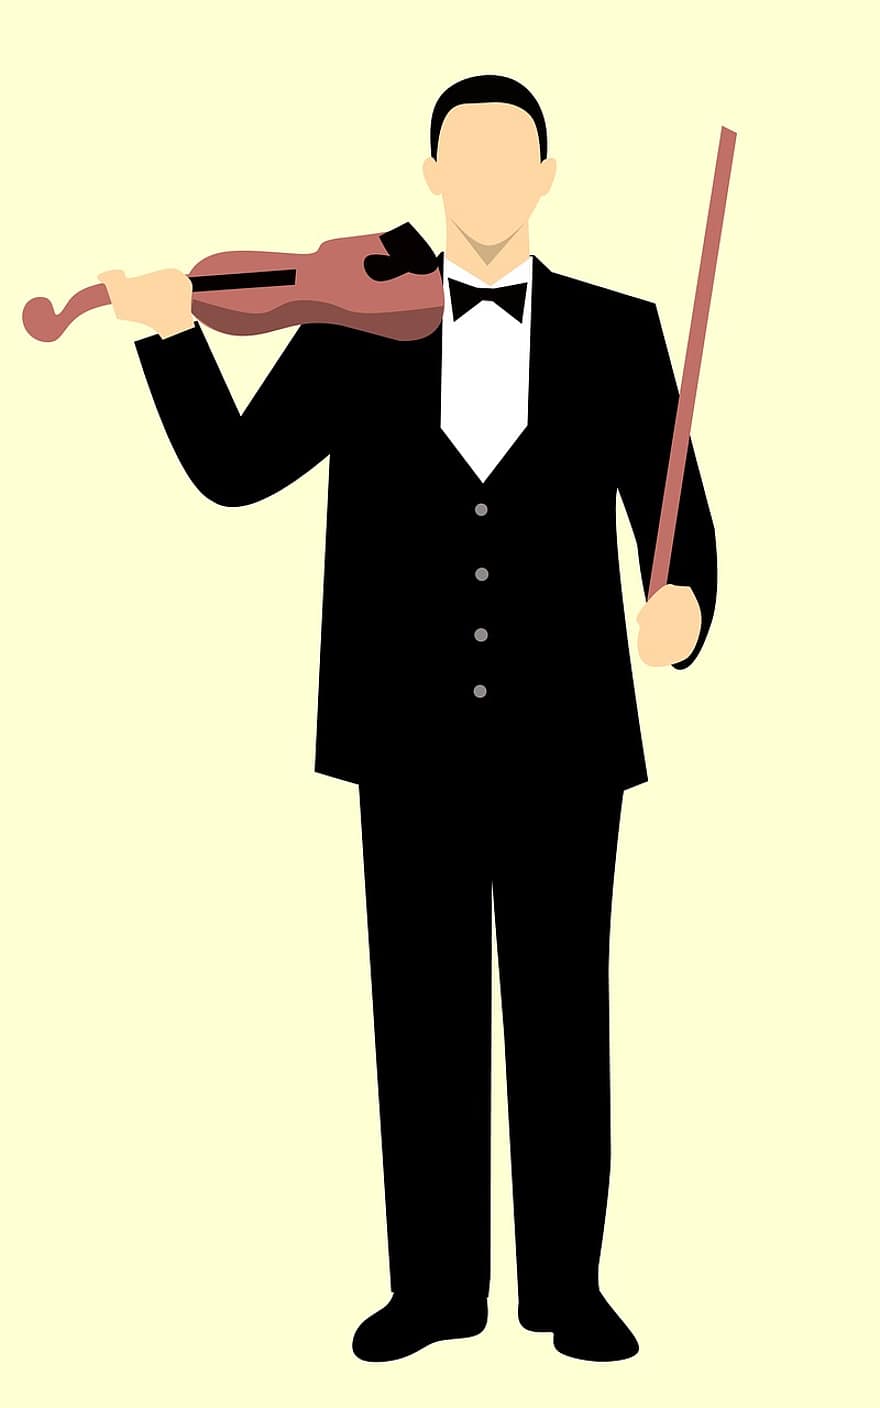 Violin, Man, Adult, Caucasian, Cheerful, Classic, Classical, Classy Clothes, Clothing, Concept, Elegance